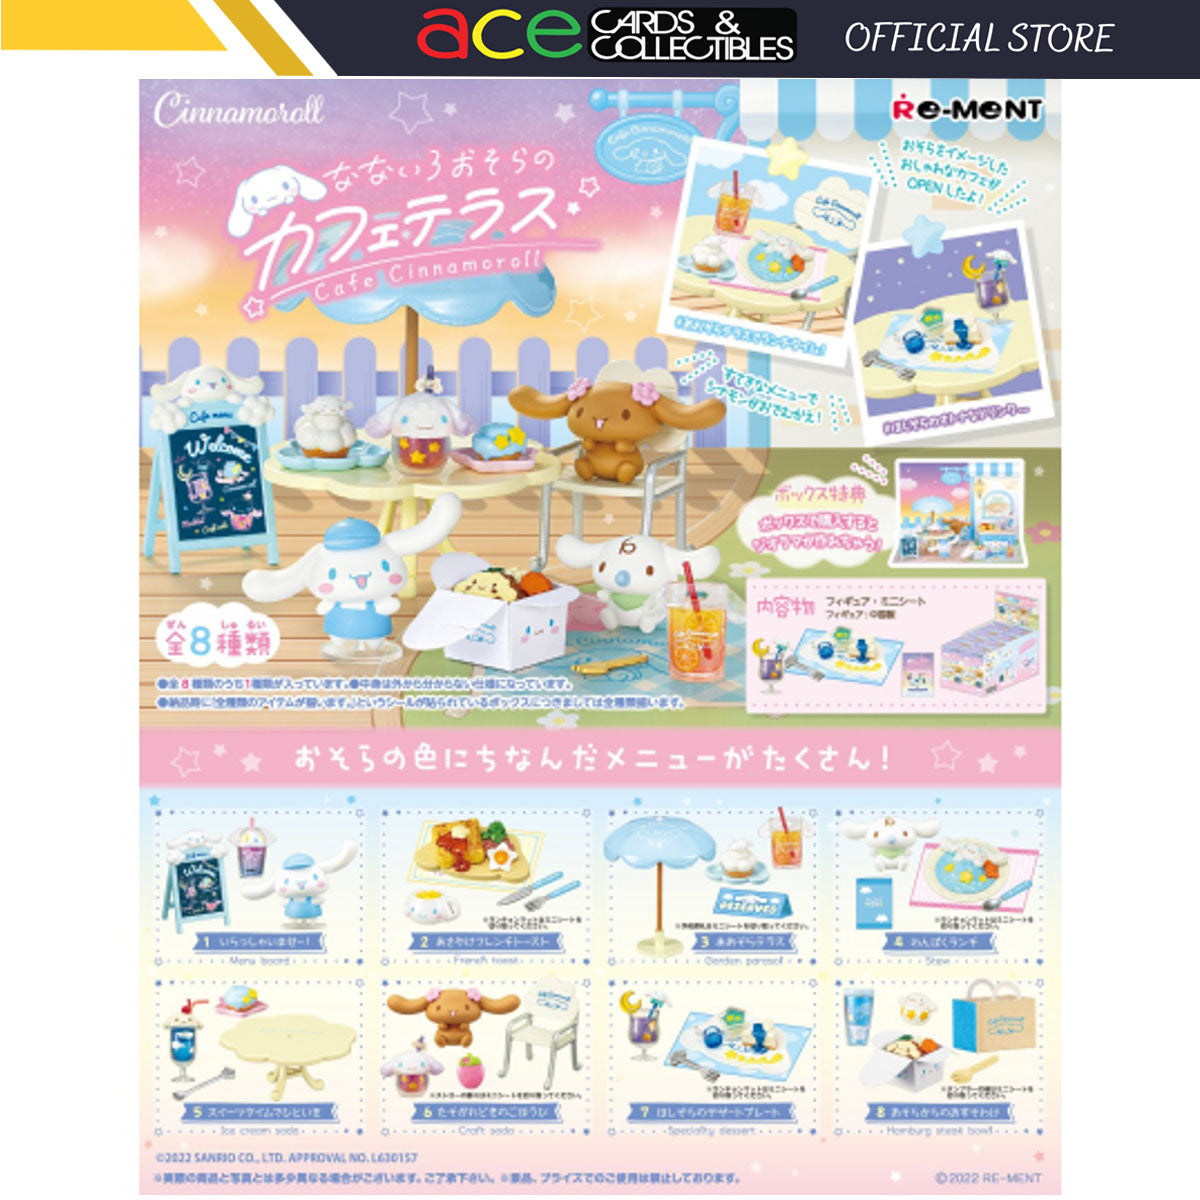 Re-Ment Cinnamoroll Cafe-Single Box (Random)-Re-Ment-Ace Cards & Collectibles